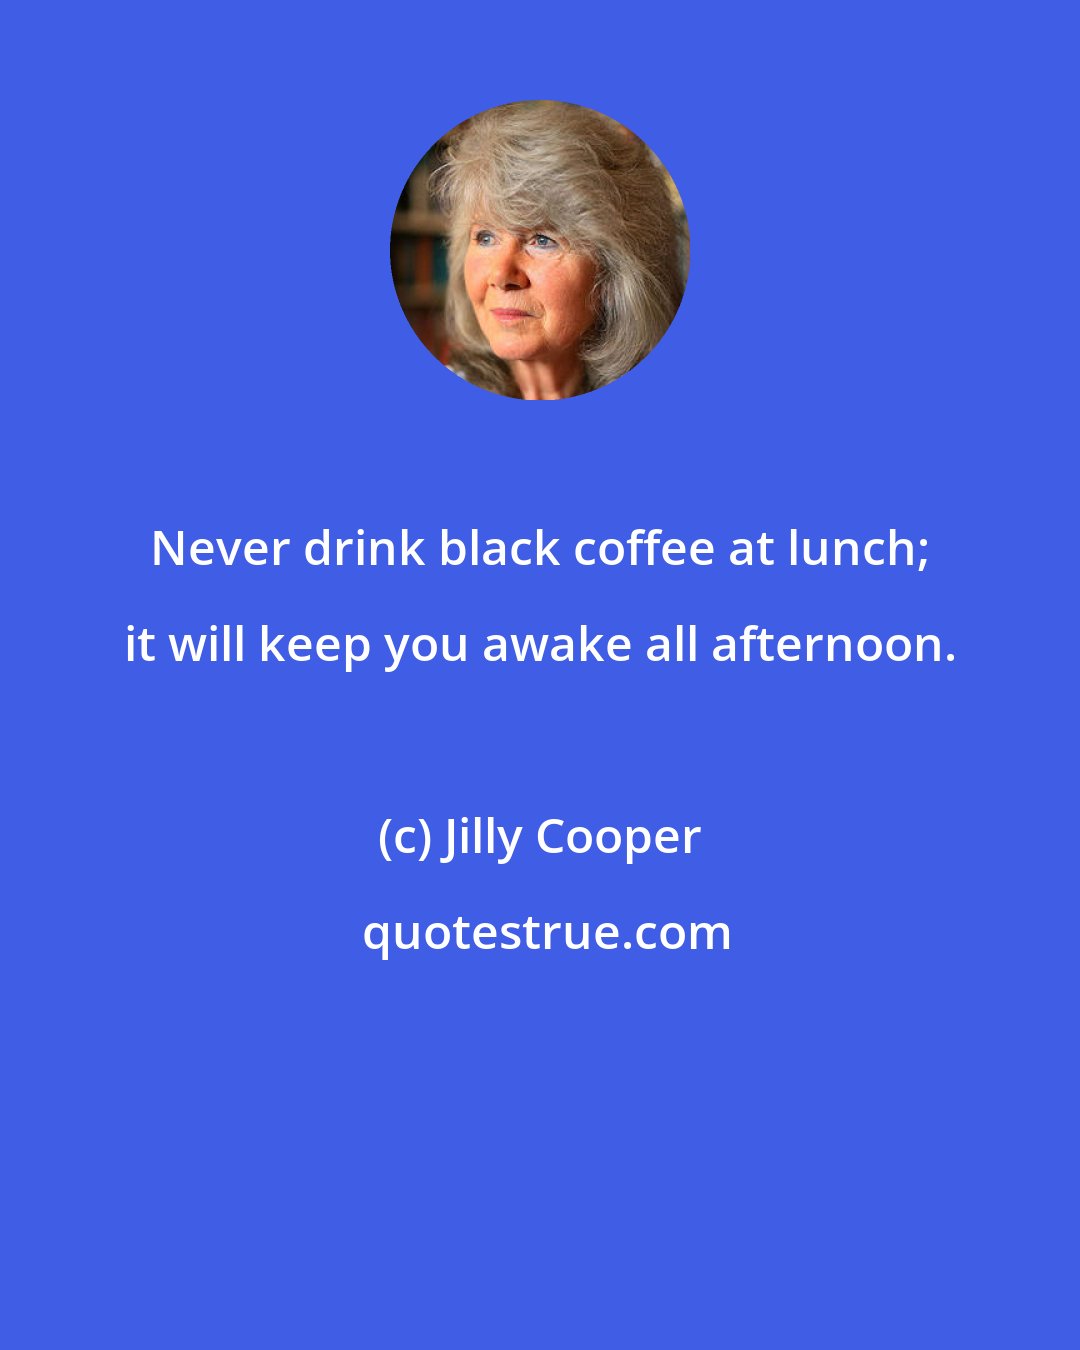 Jilly Cooper: Never drink black coffee at lunch; it will keep you awake all afternoon.